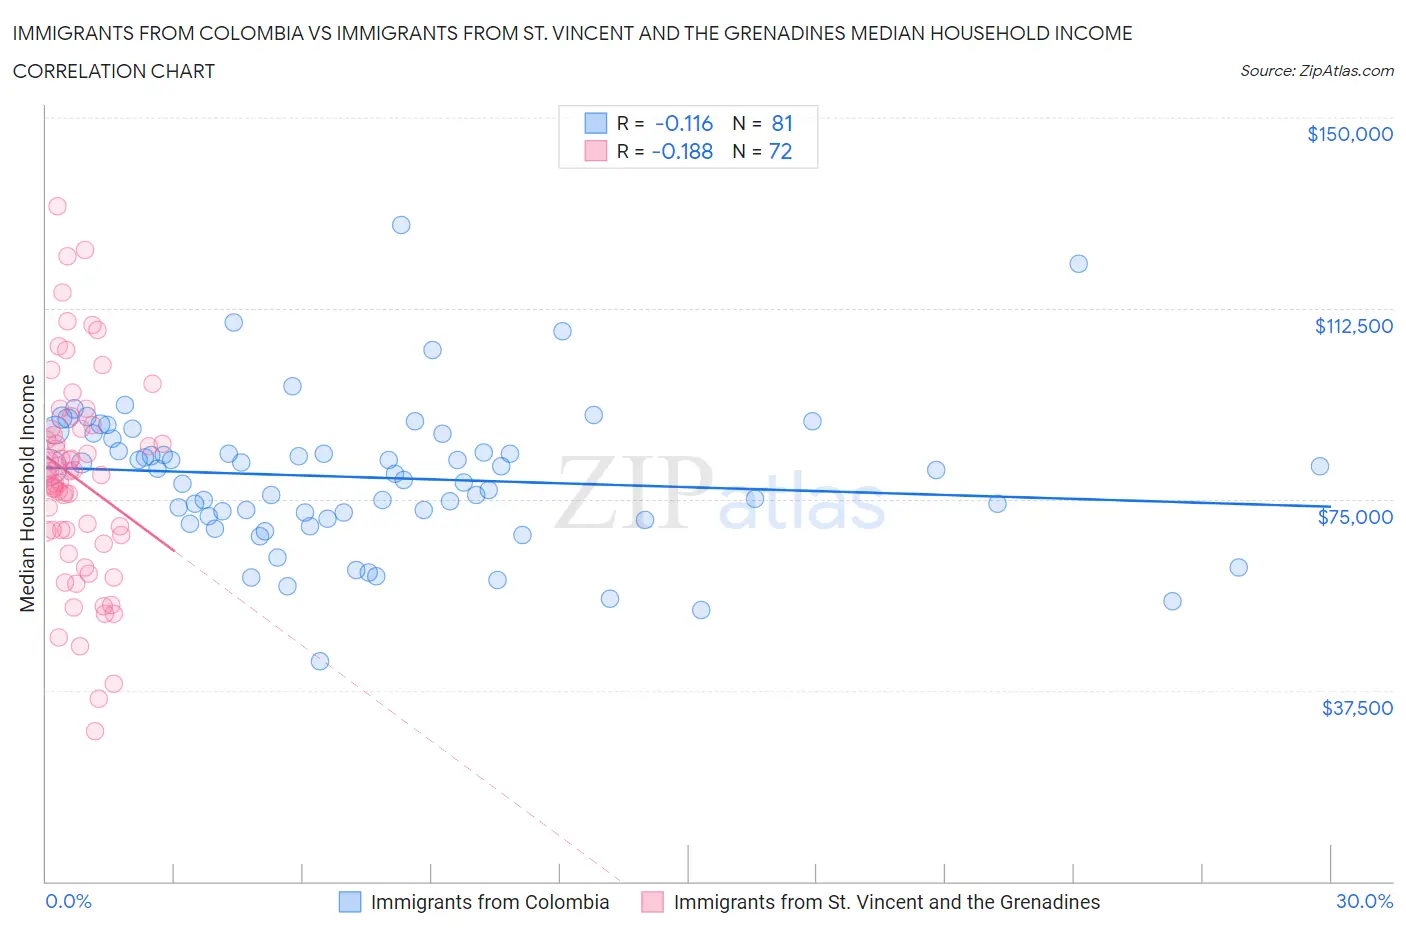 Immigrants from Colombia vs Immigrants from St. Vincent and the Grenadines Median Household Income